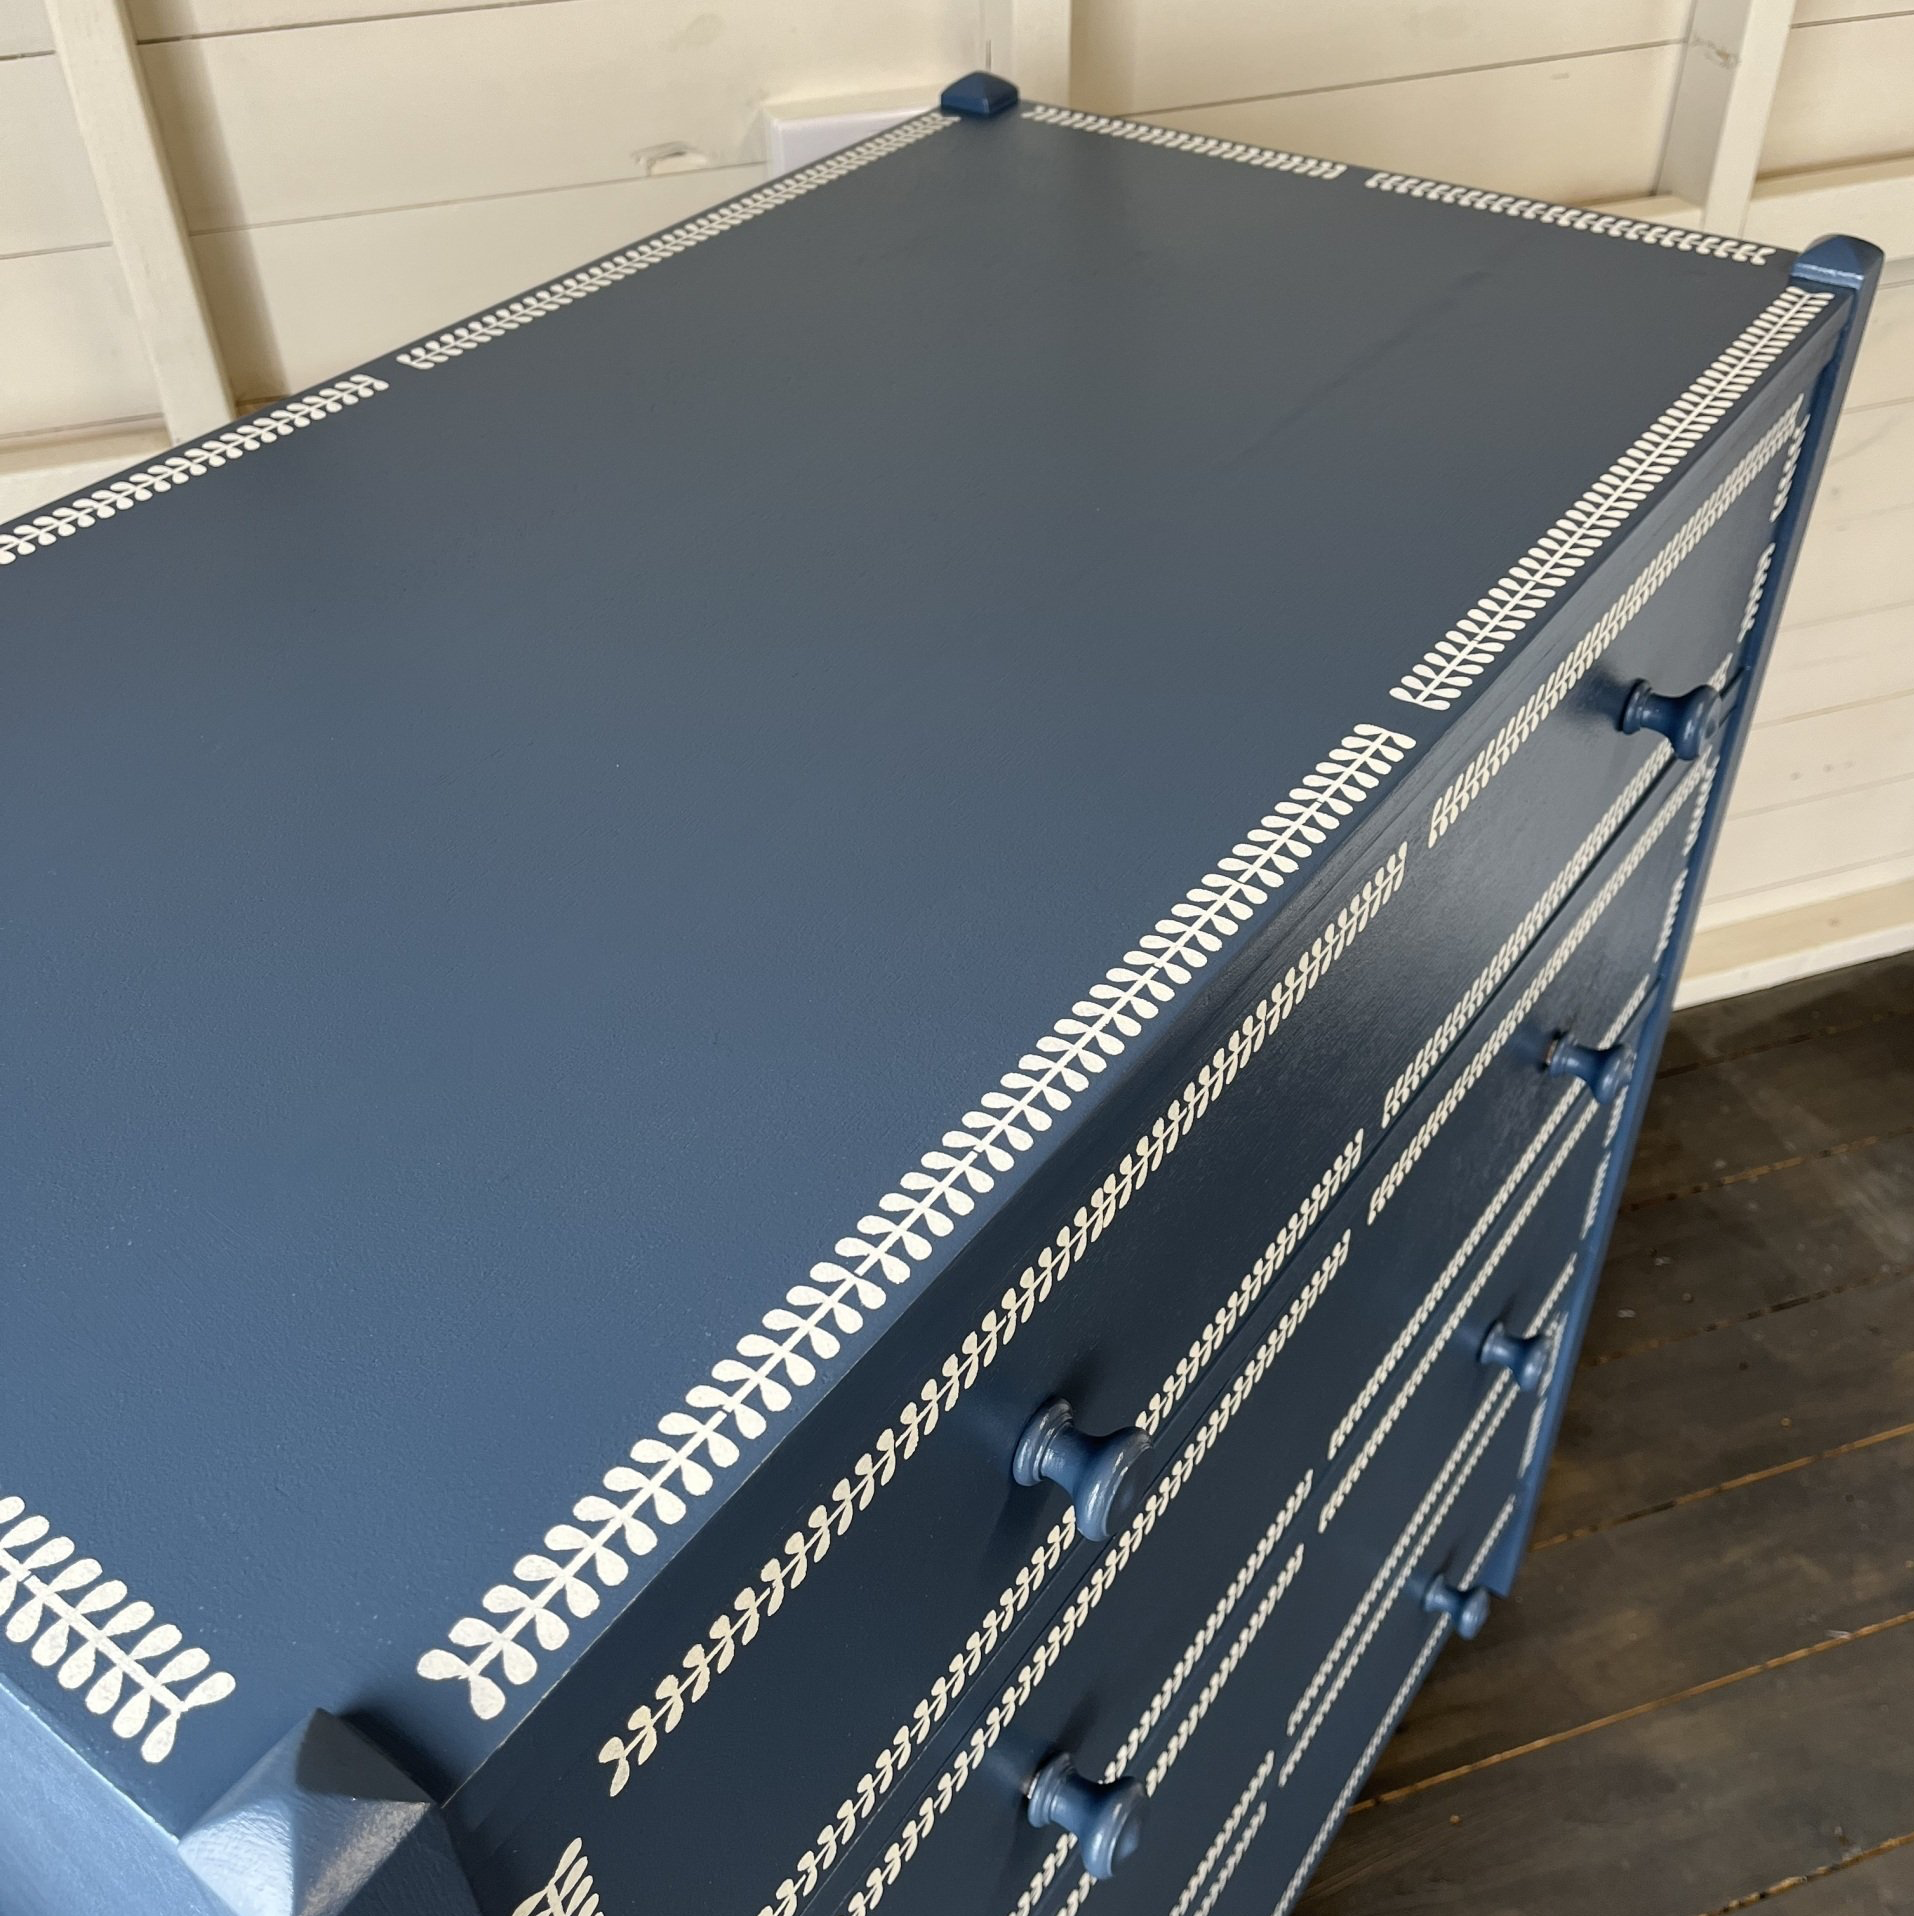 Paynes Grey Drawers by Helen Bateman Upcycled